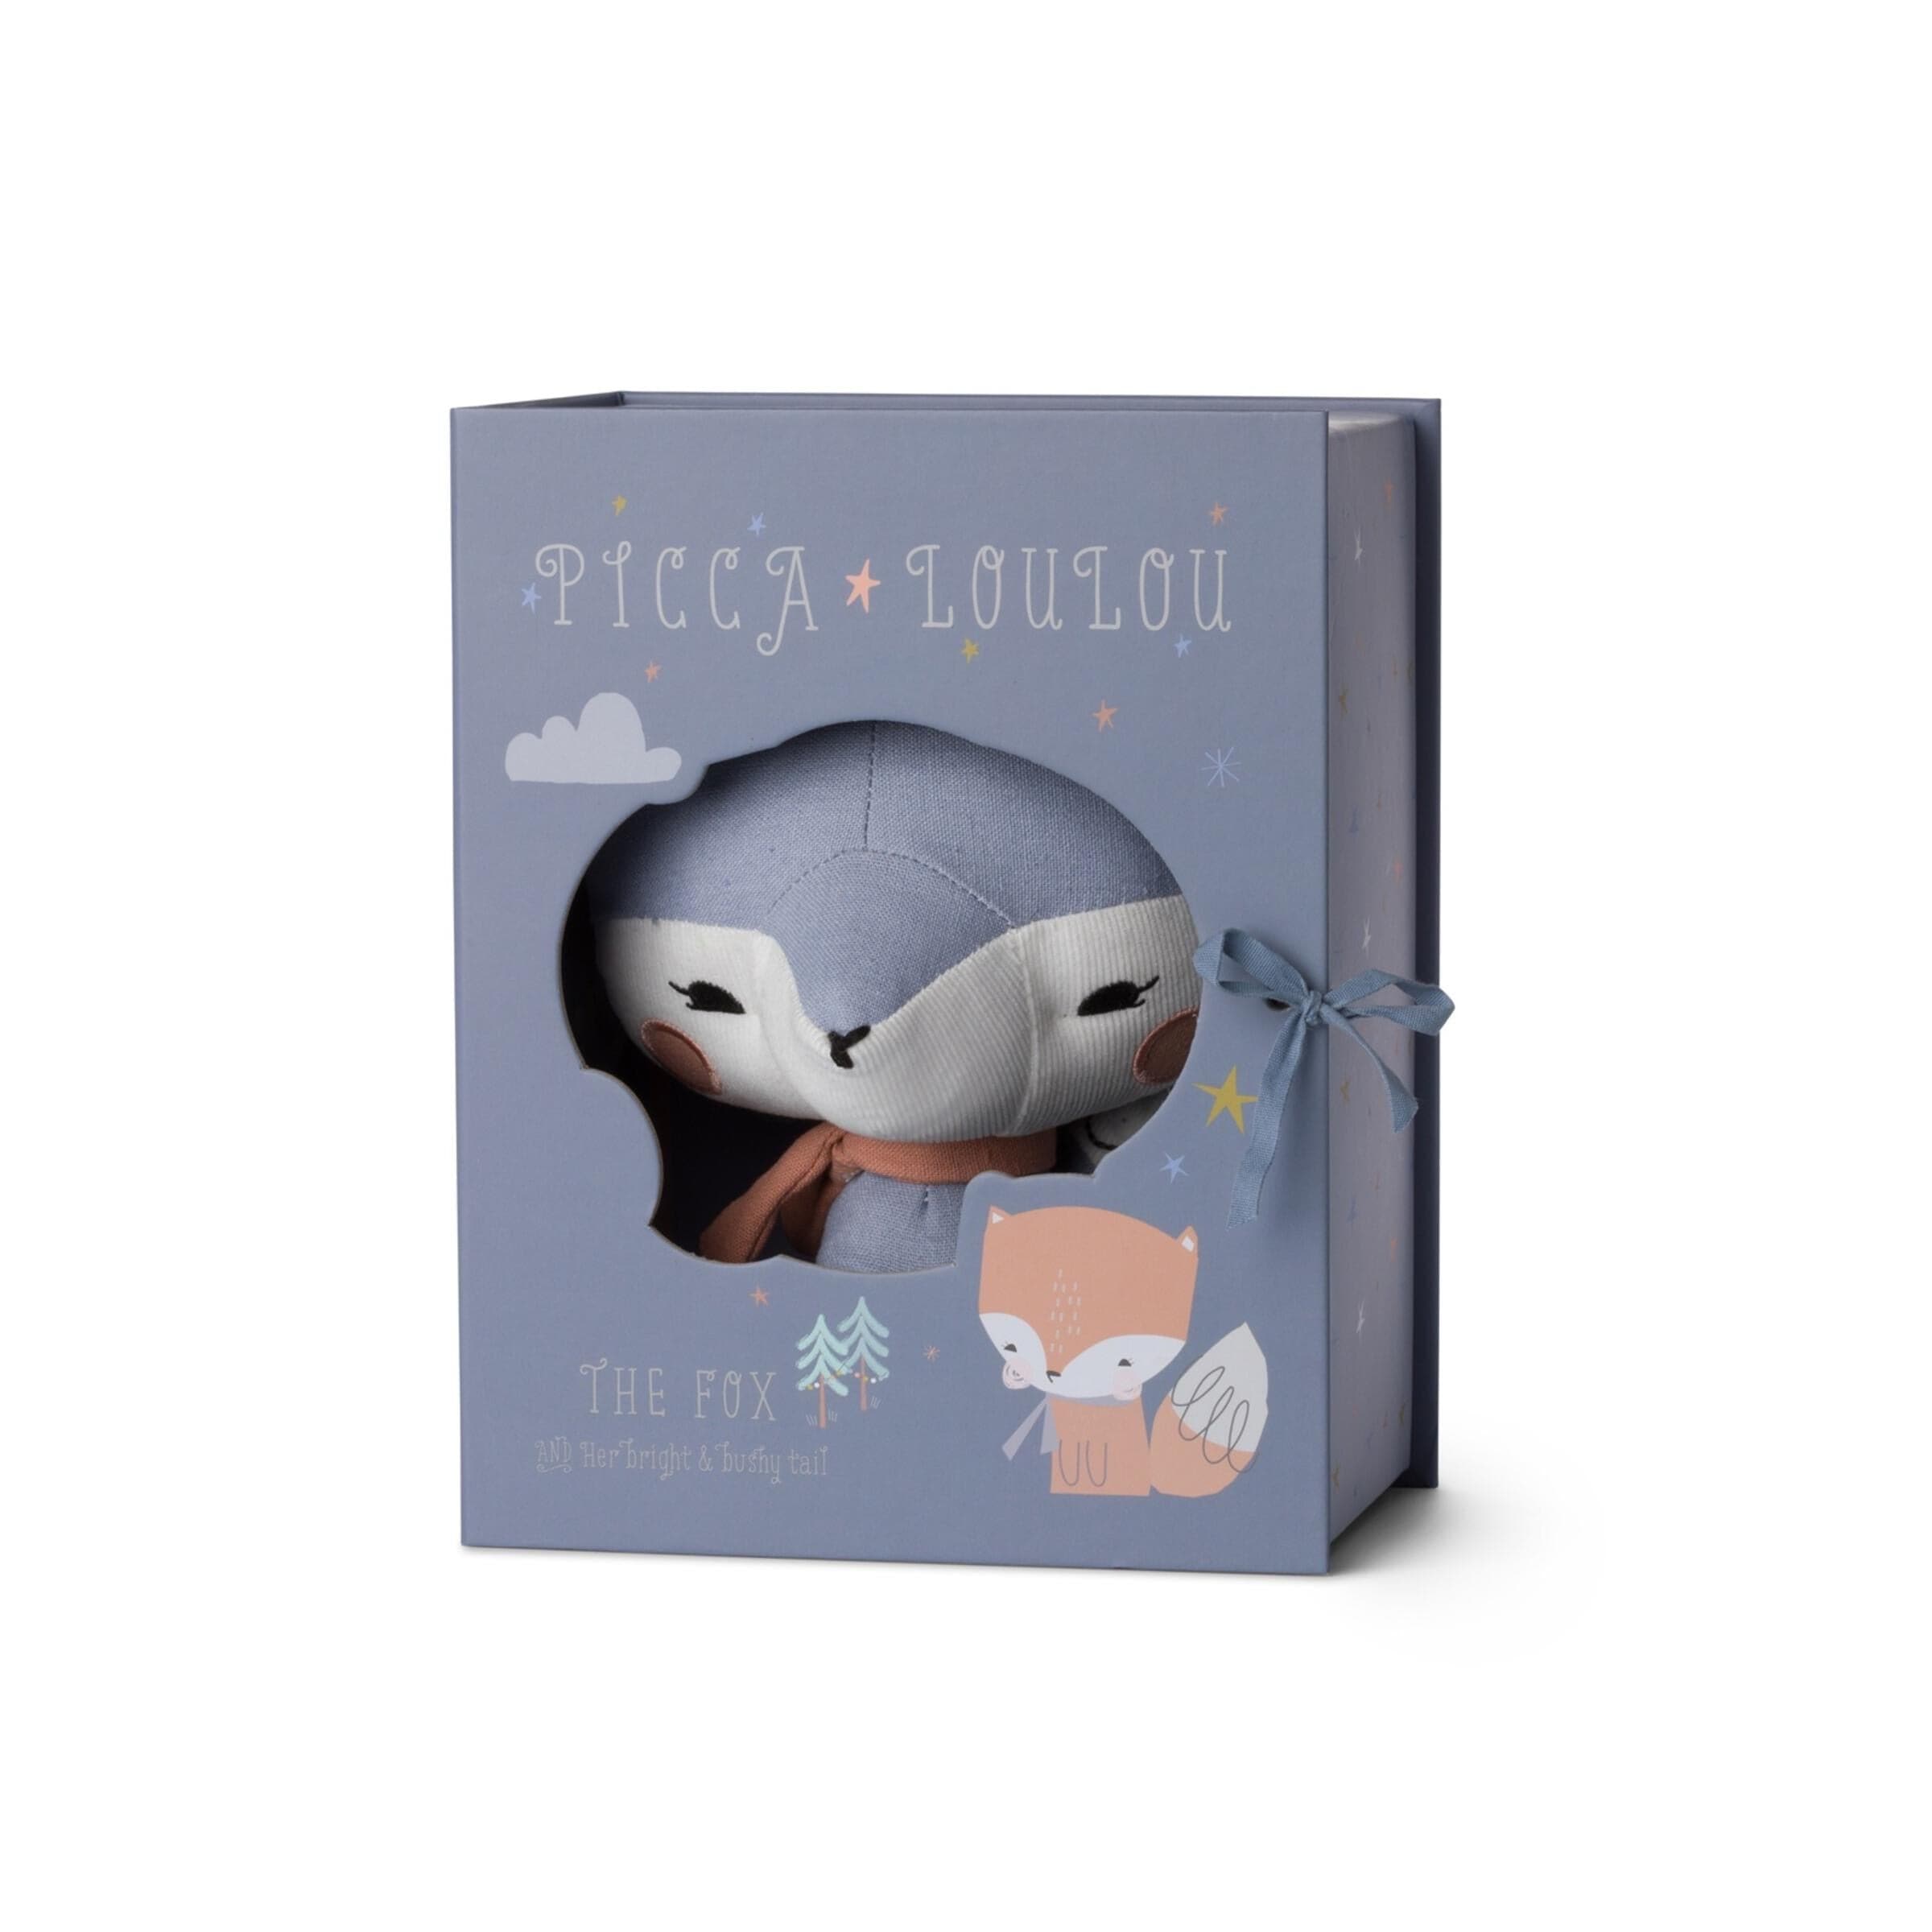 Picca Loulou | Blue Fox in Gift Box